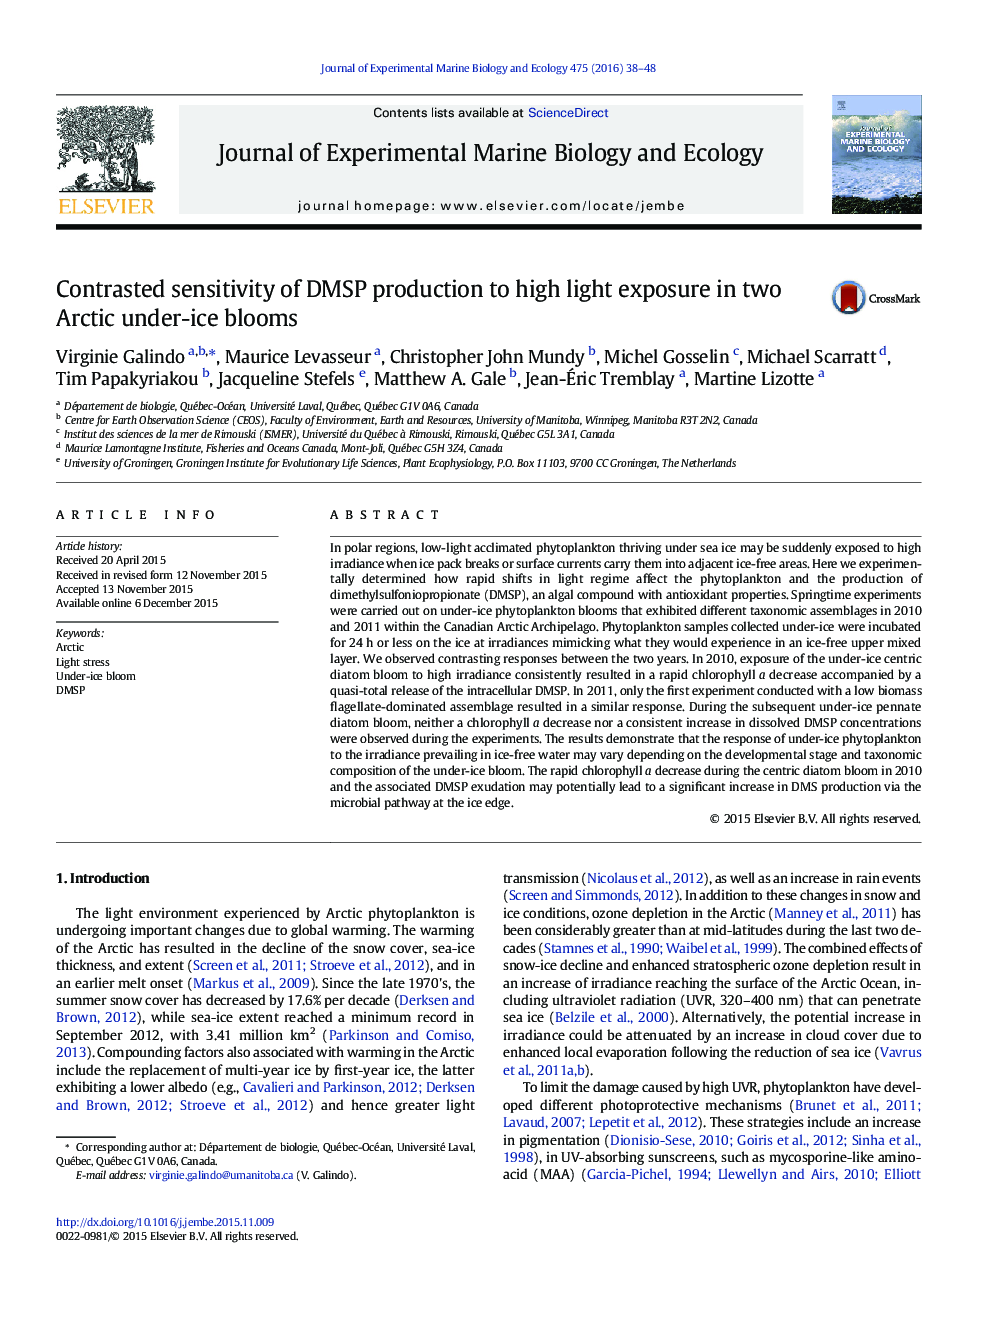 Contrasted sensitivity of DMSP production to high light exposure in two Arctic under-ice blooms